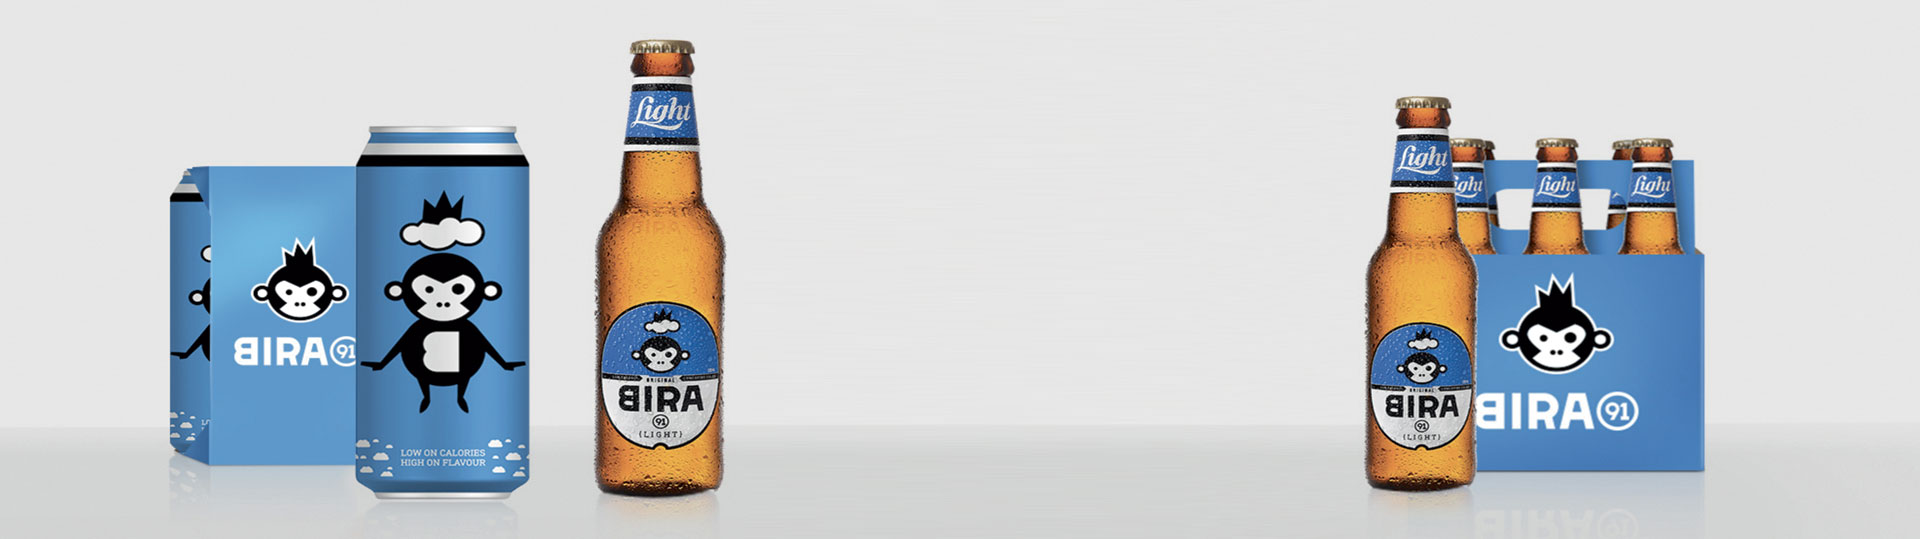 Is India's Bira 91 the fastest growing craft brewery of all time? : r/beer